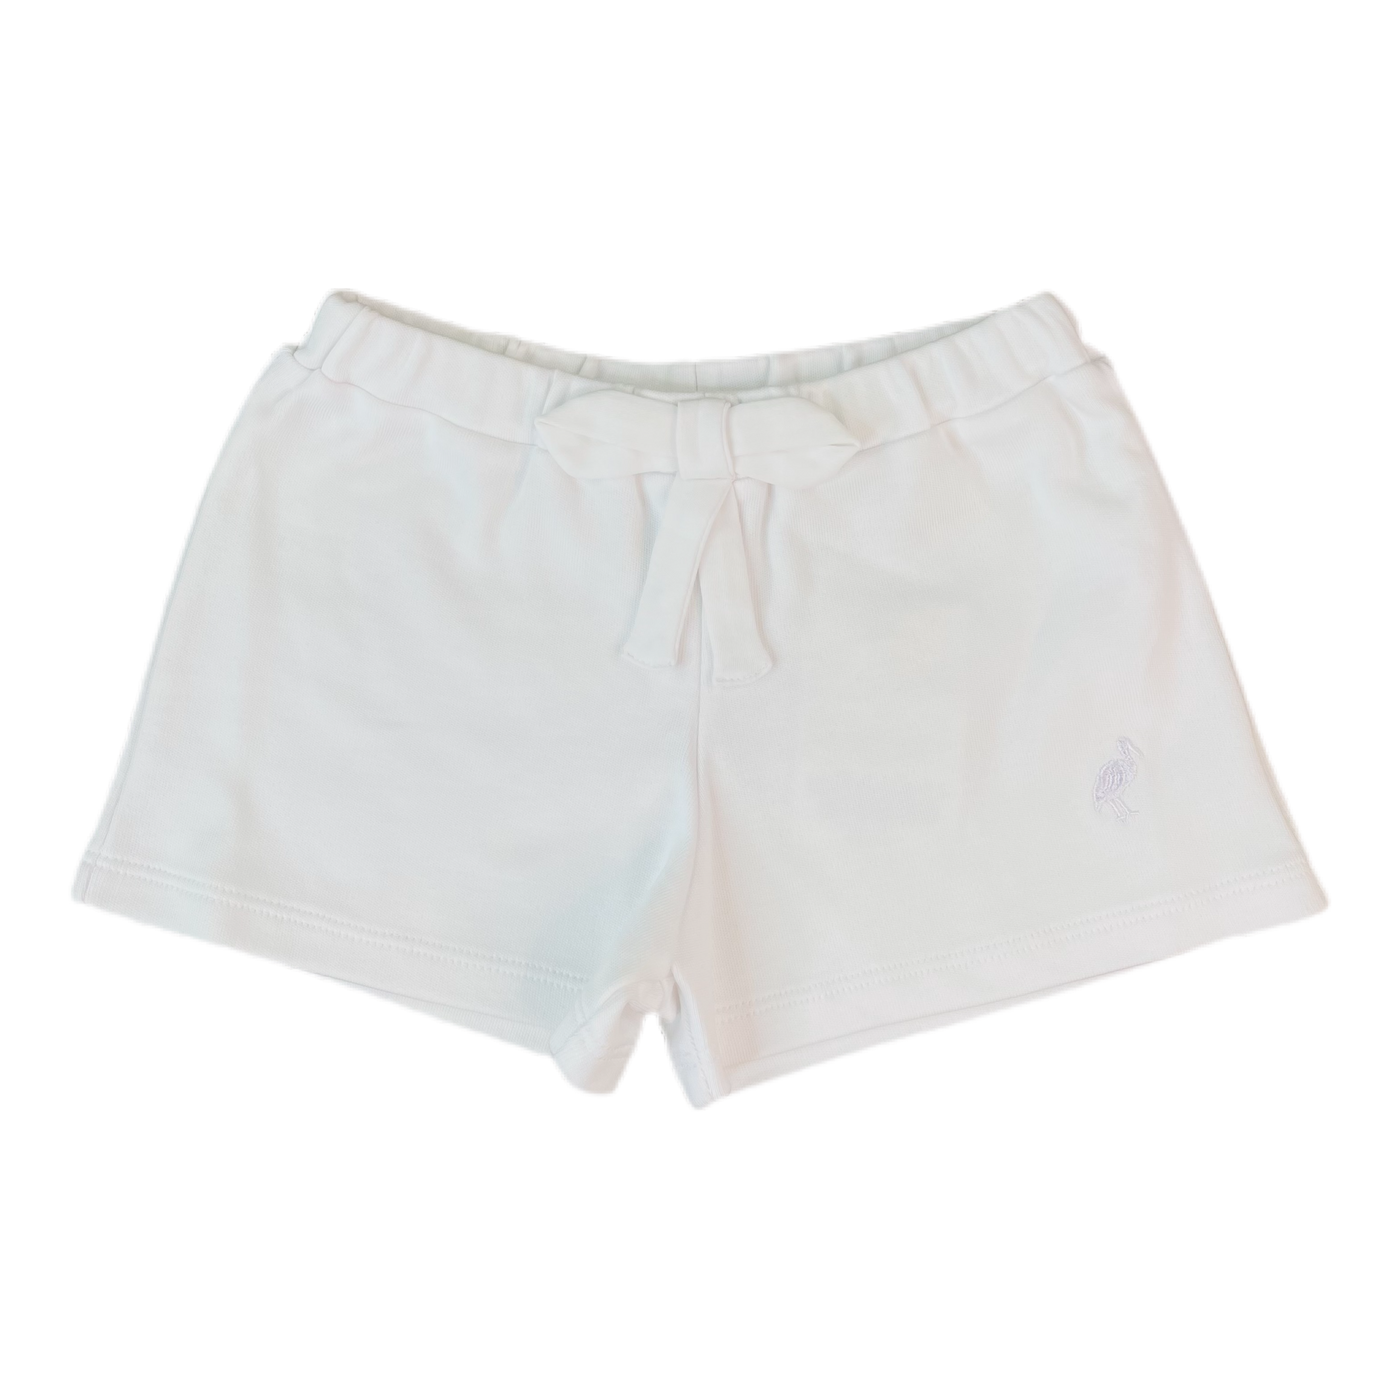 Shipley Shorts with Bow and Stork - Worth Ave White